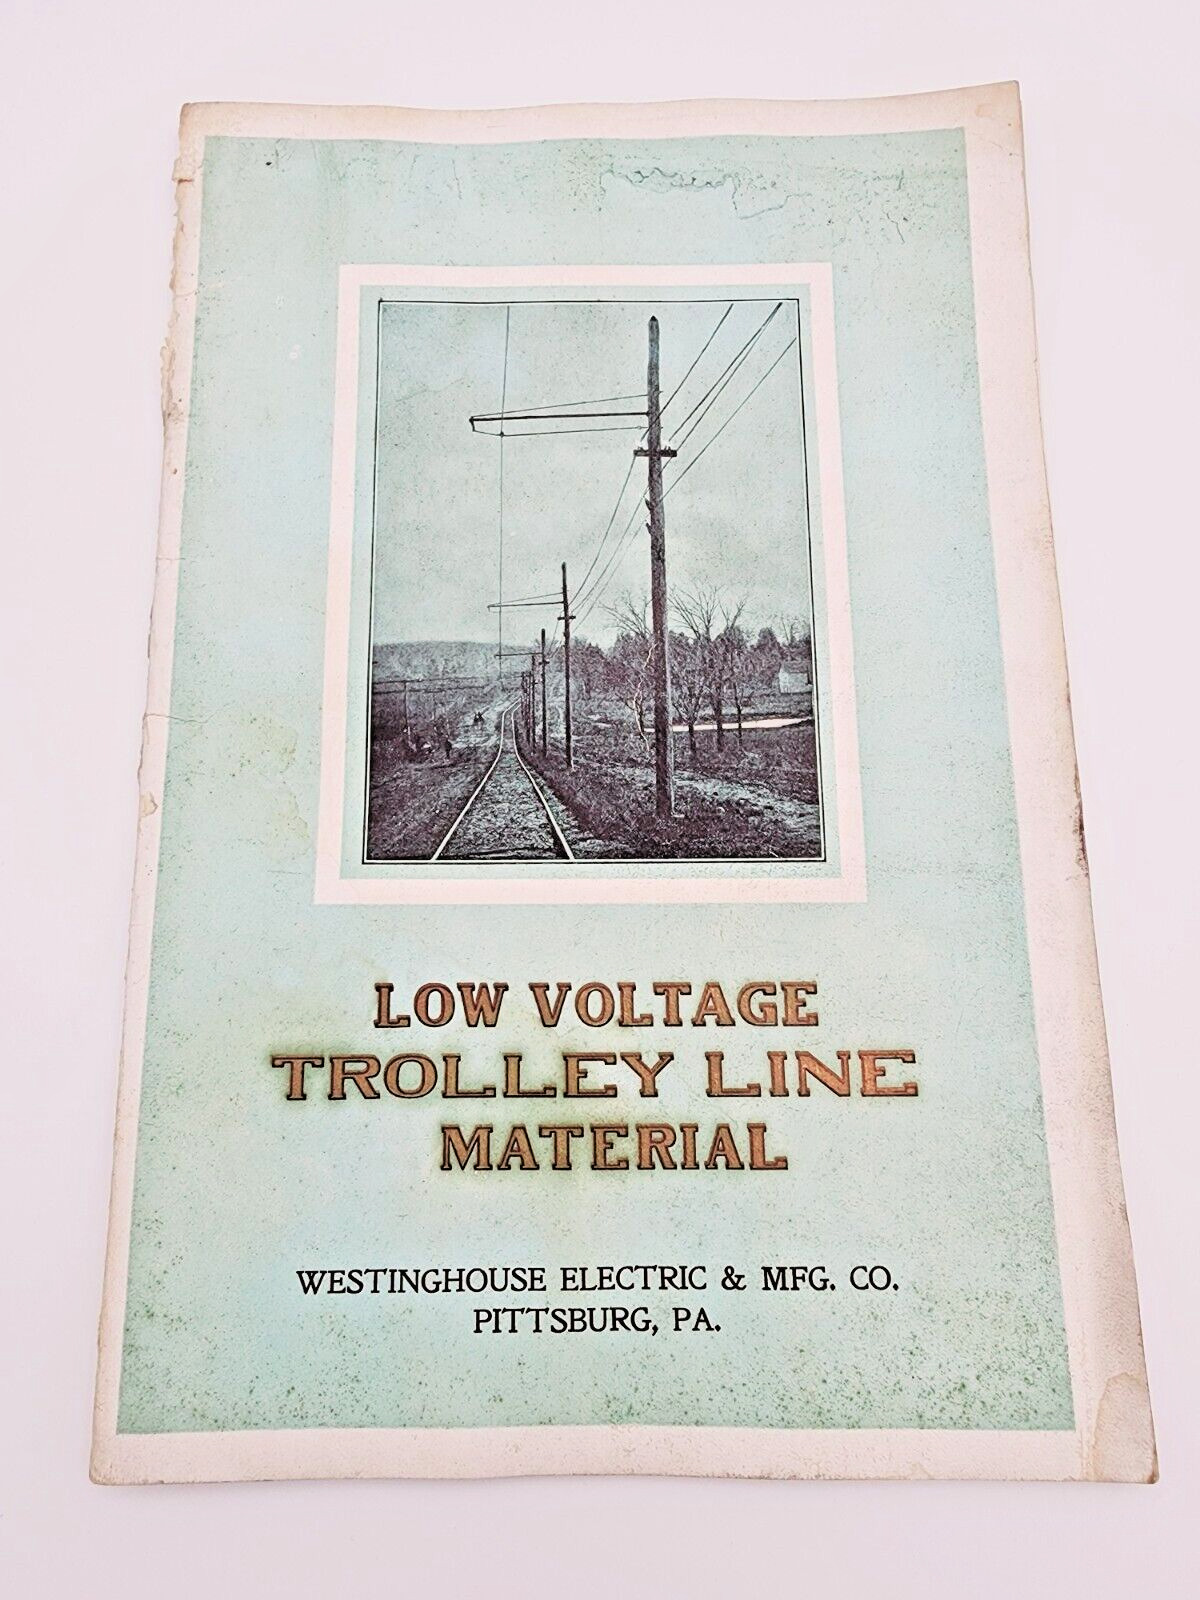 1906 Westinghouse Electric & MFG Co. Low Voltage Trolley Line Material Booklet